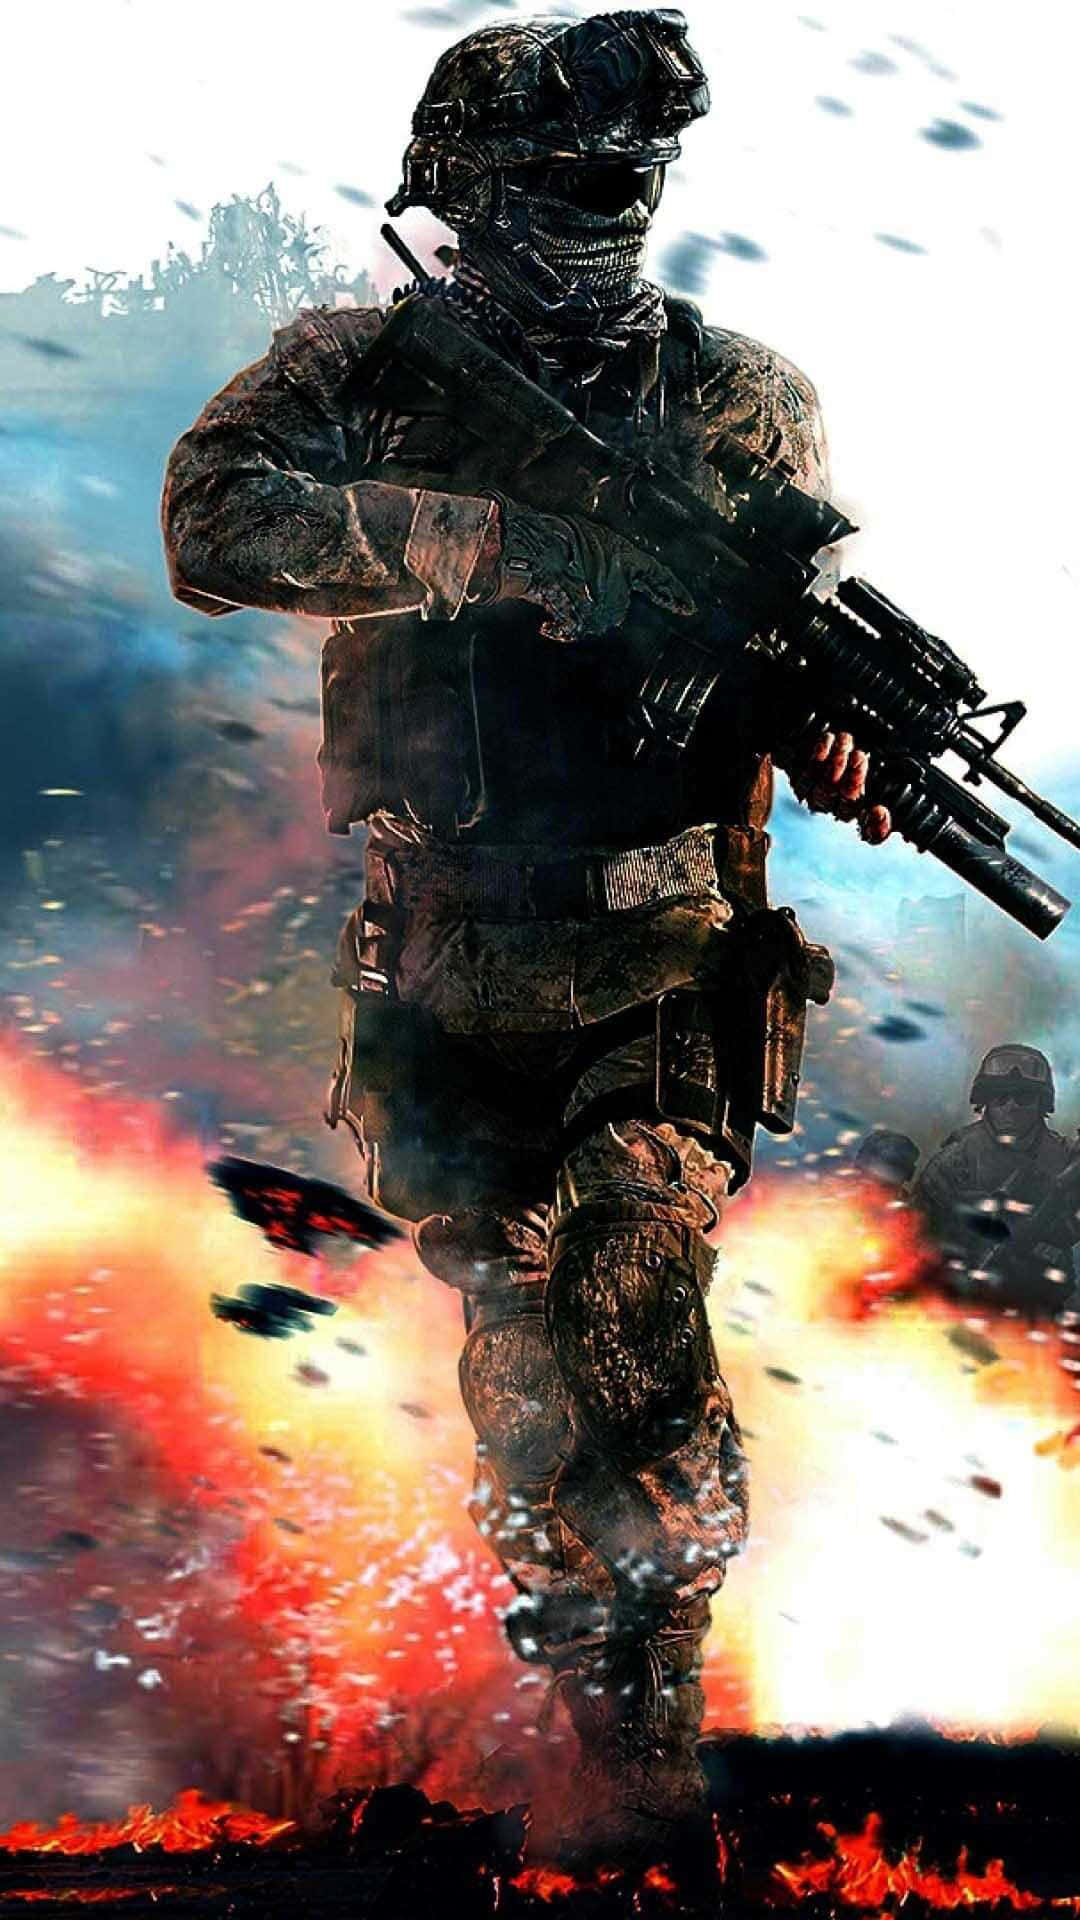 - Get the look and feel of military strength with the Iphone Wallpaper